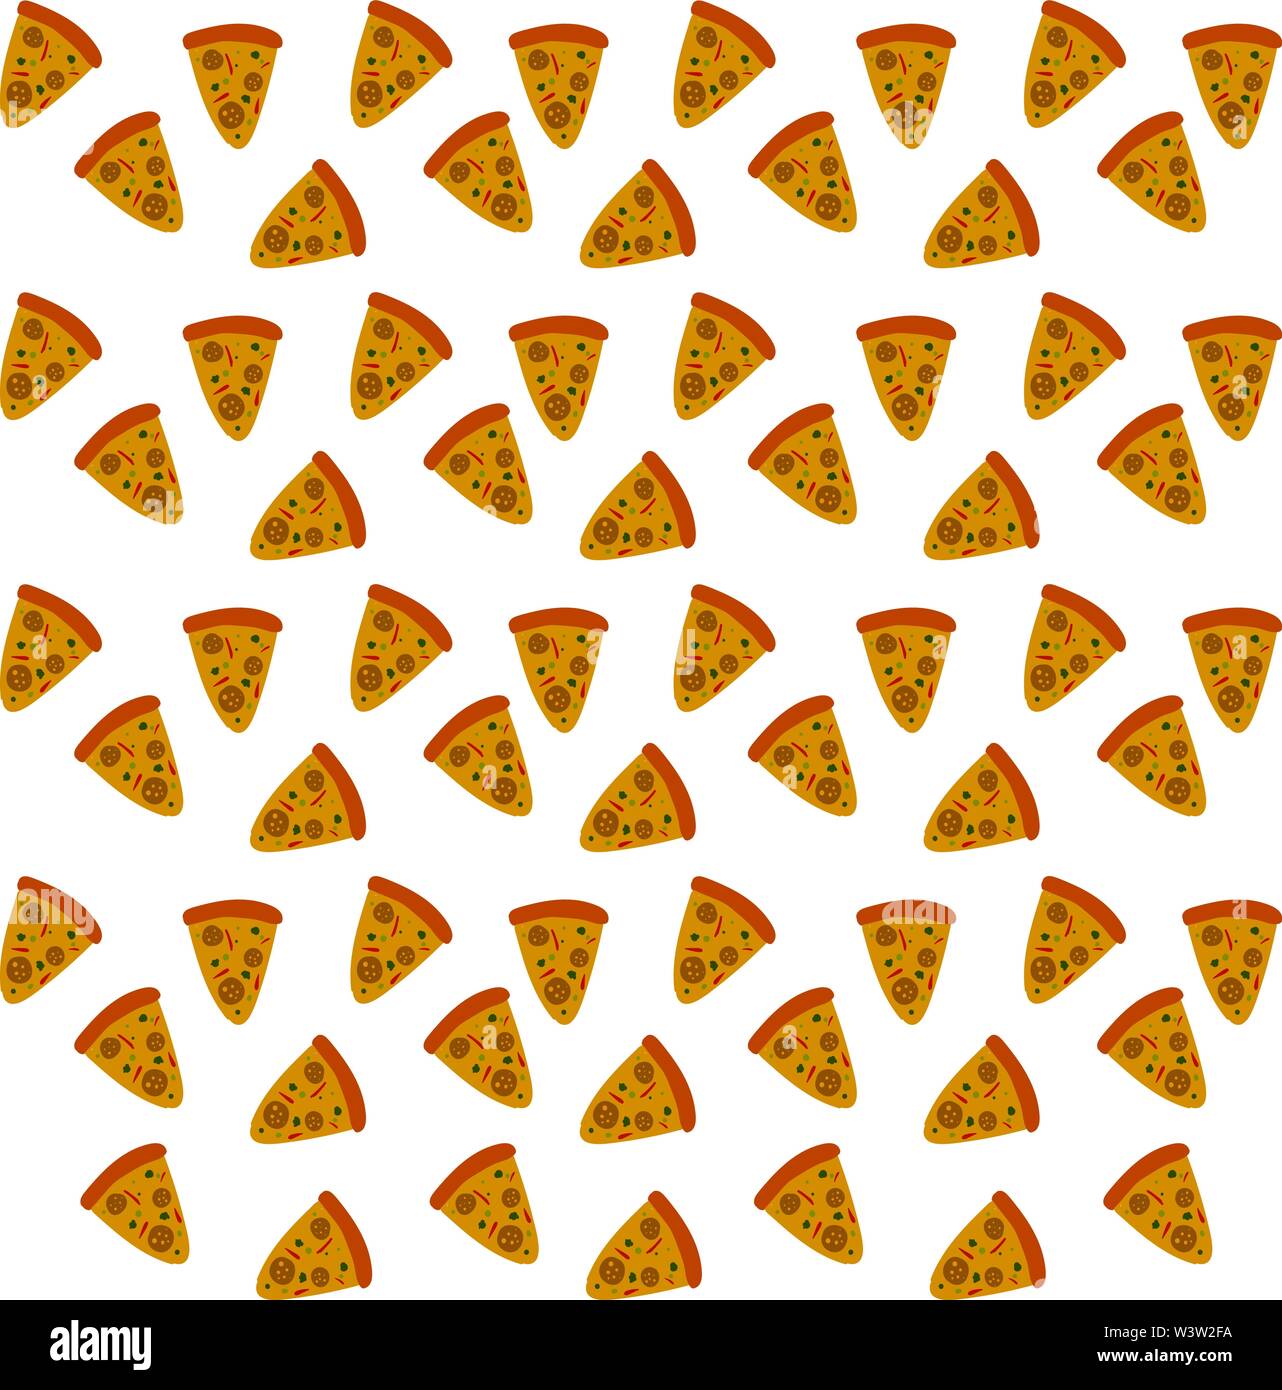 Wallpaper pizza Stock Vector Images - Alamy